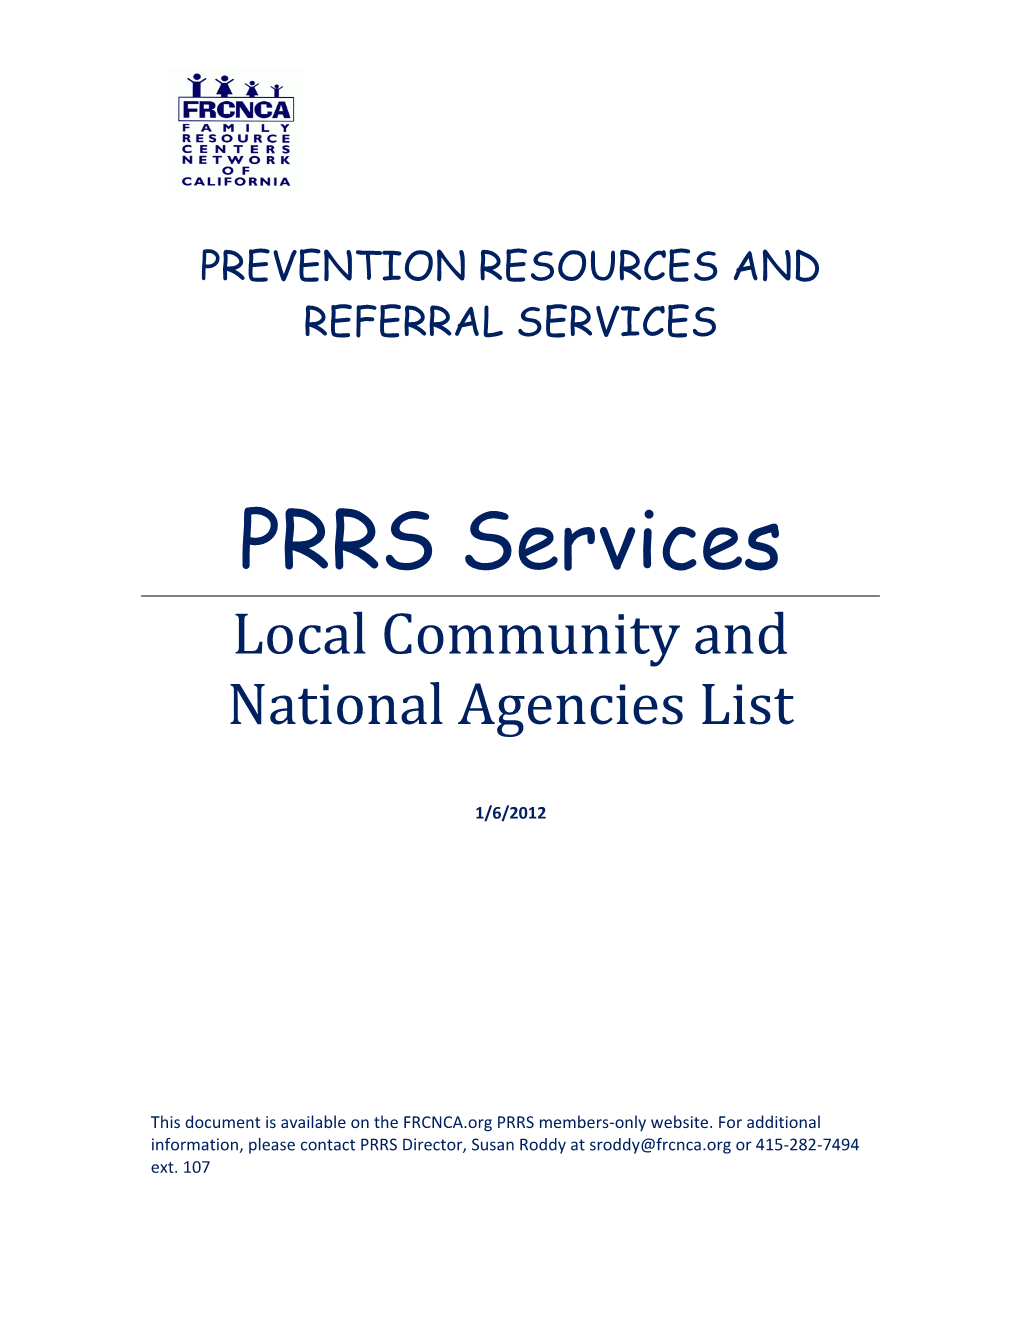 Prevention Resource and Referral Services